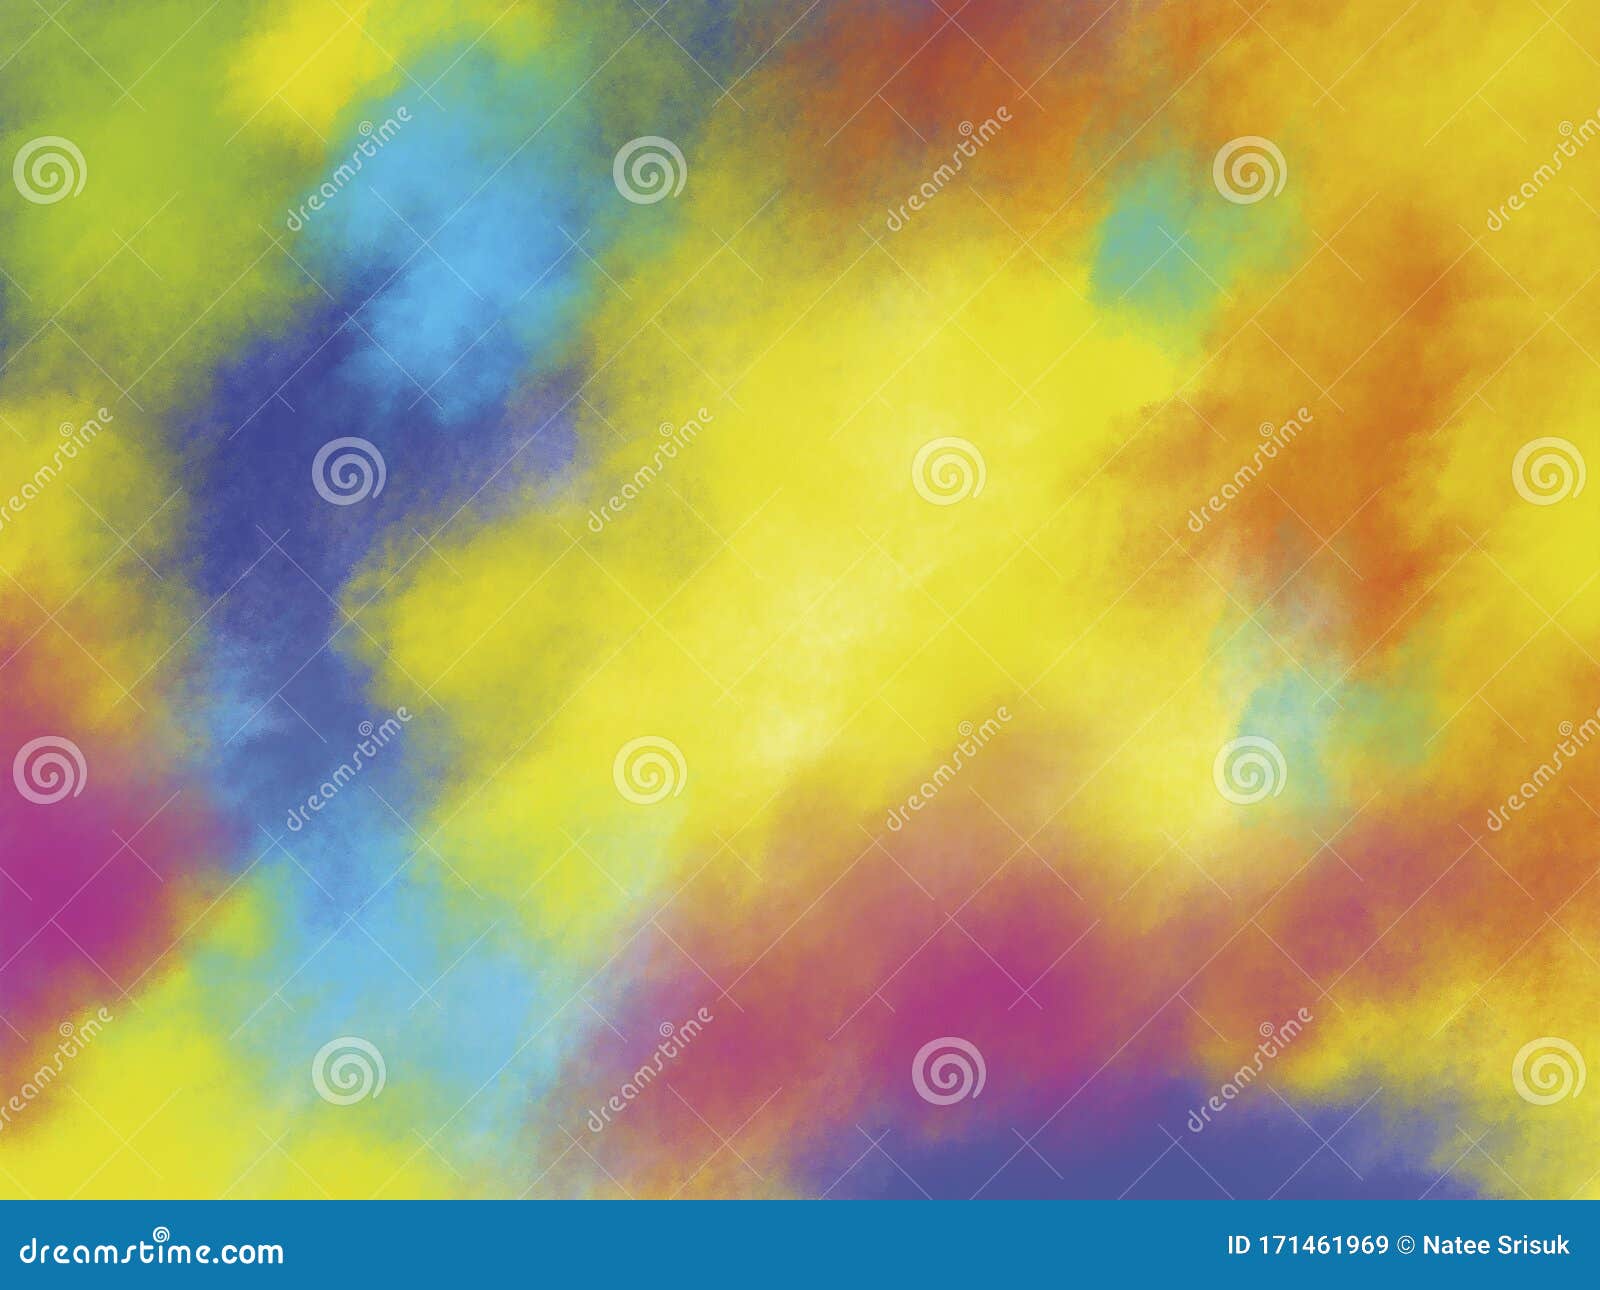 1137 Holi Background Photos and Premium High Res Pictures  Getty Images